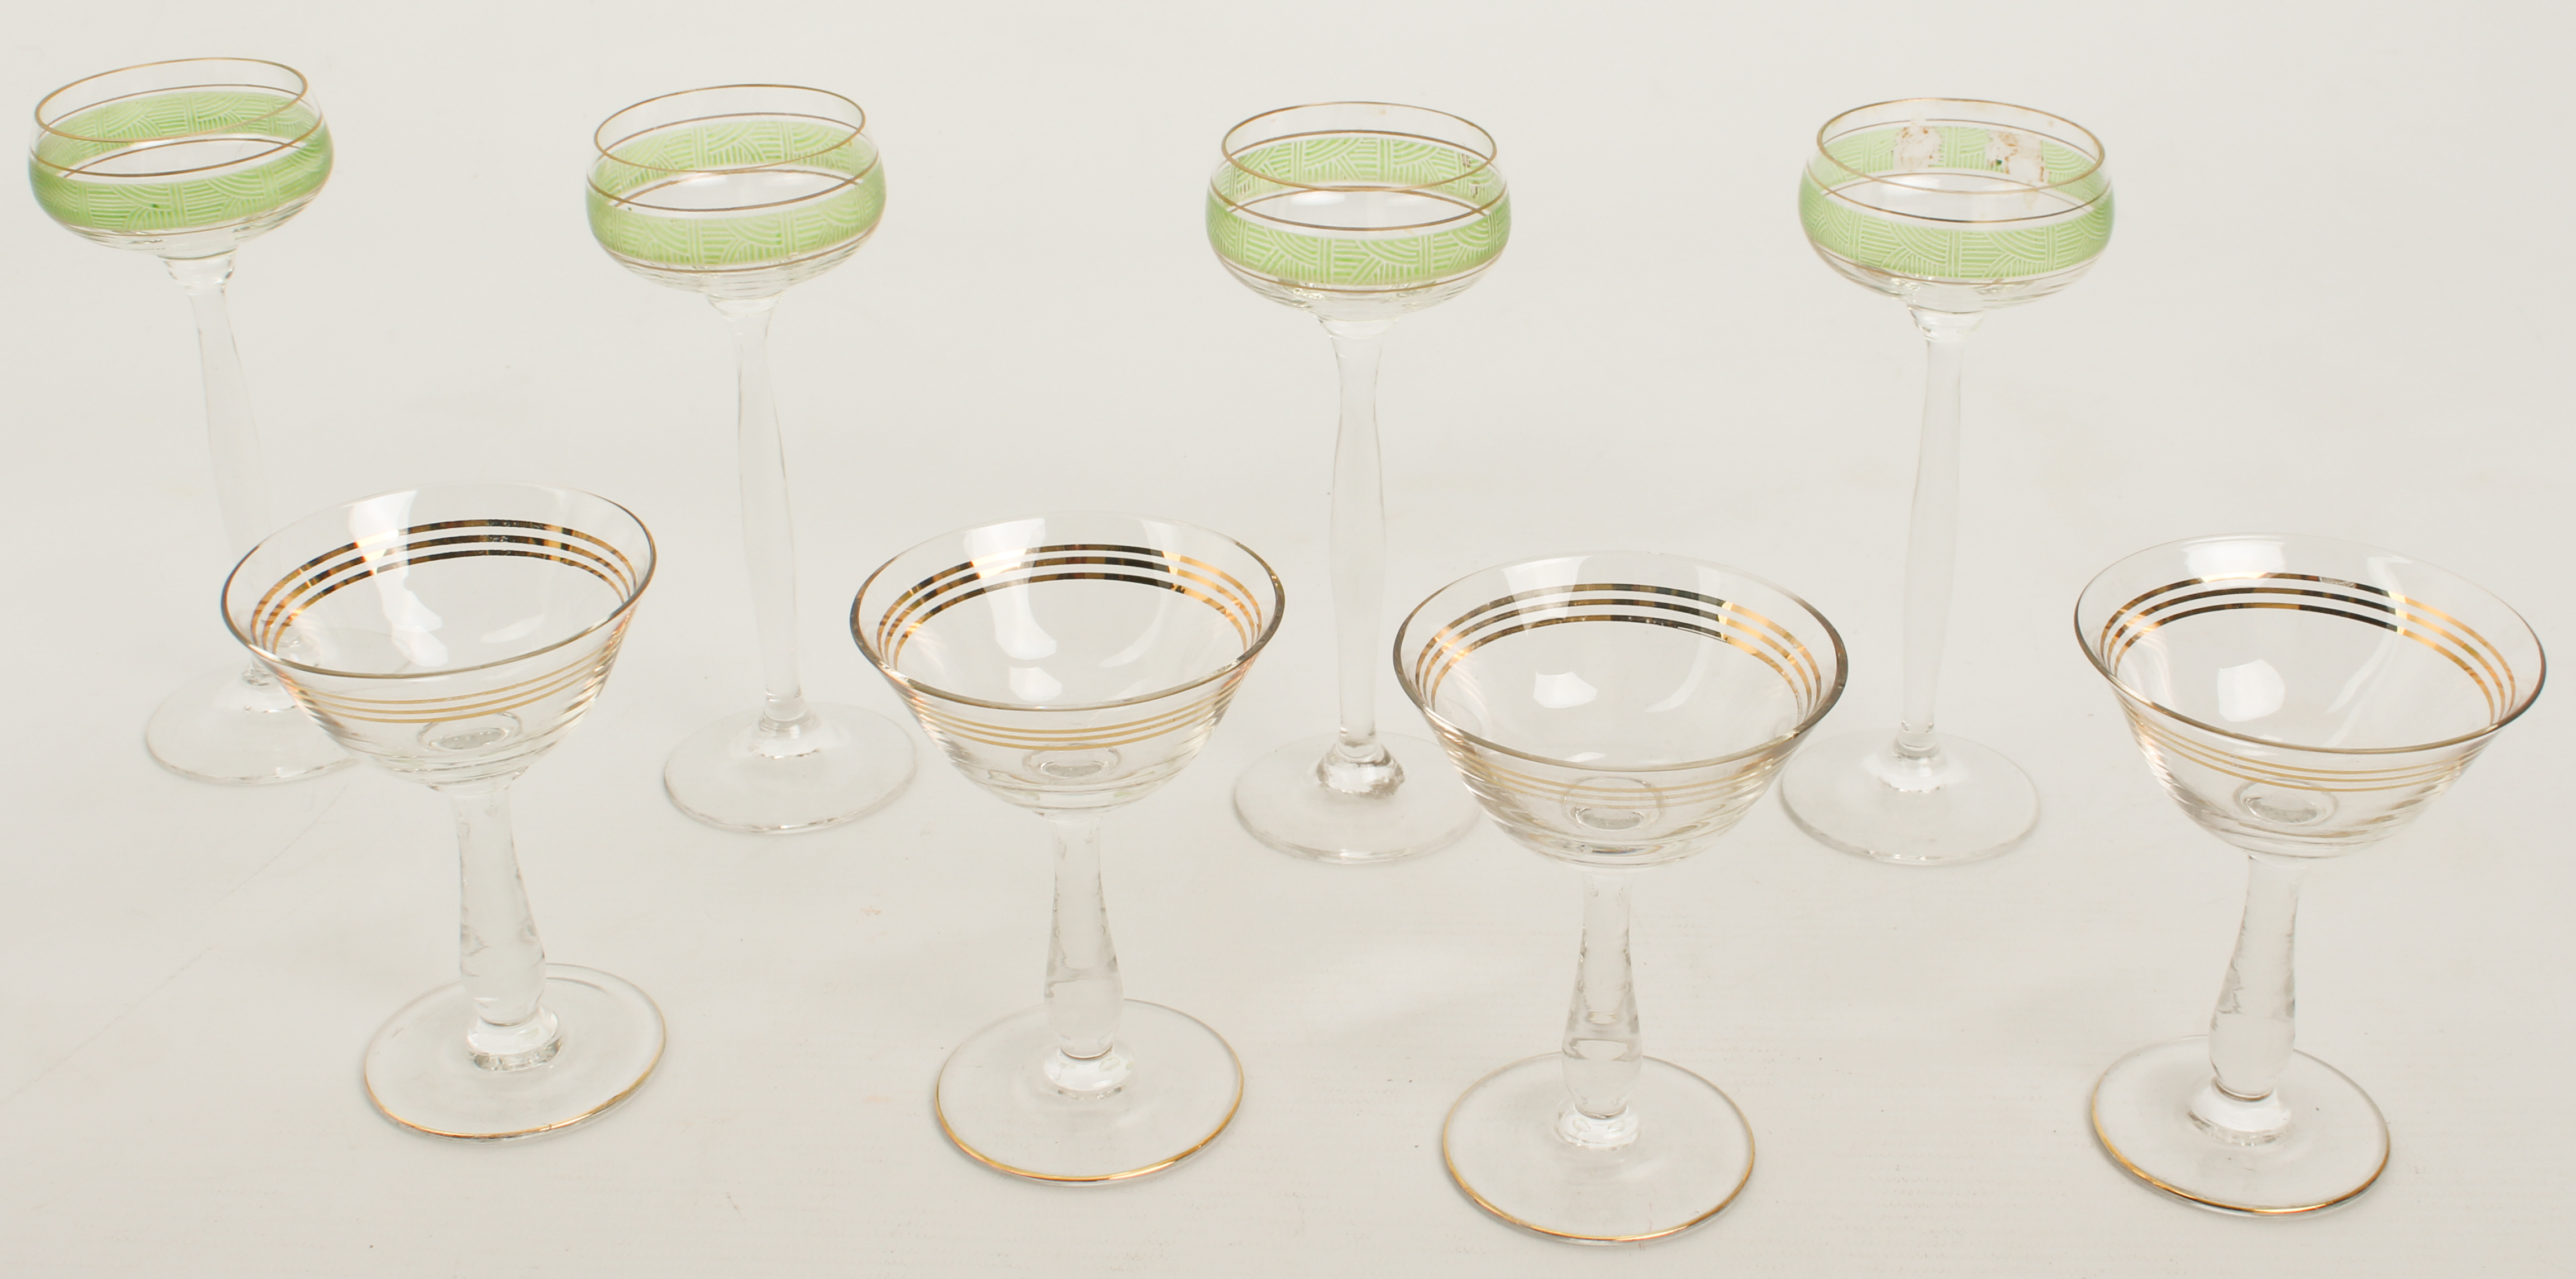 A set of four Secessionist-style tall liqueur glasses in the style of Peter Behrens - the shallow,